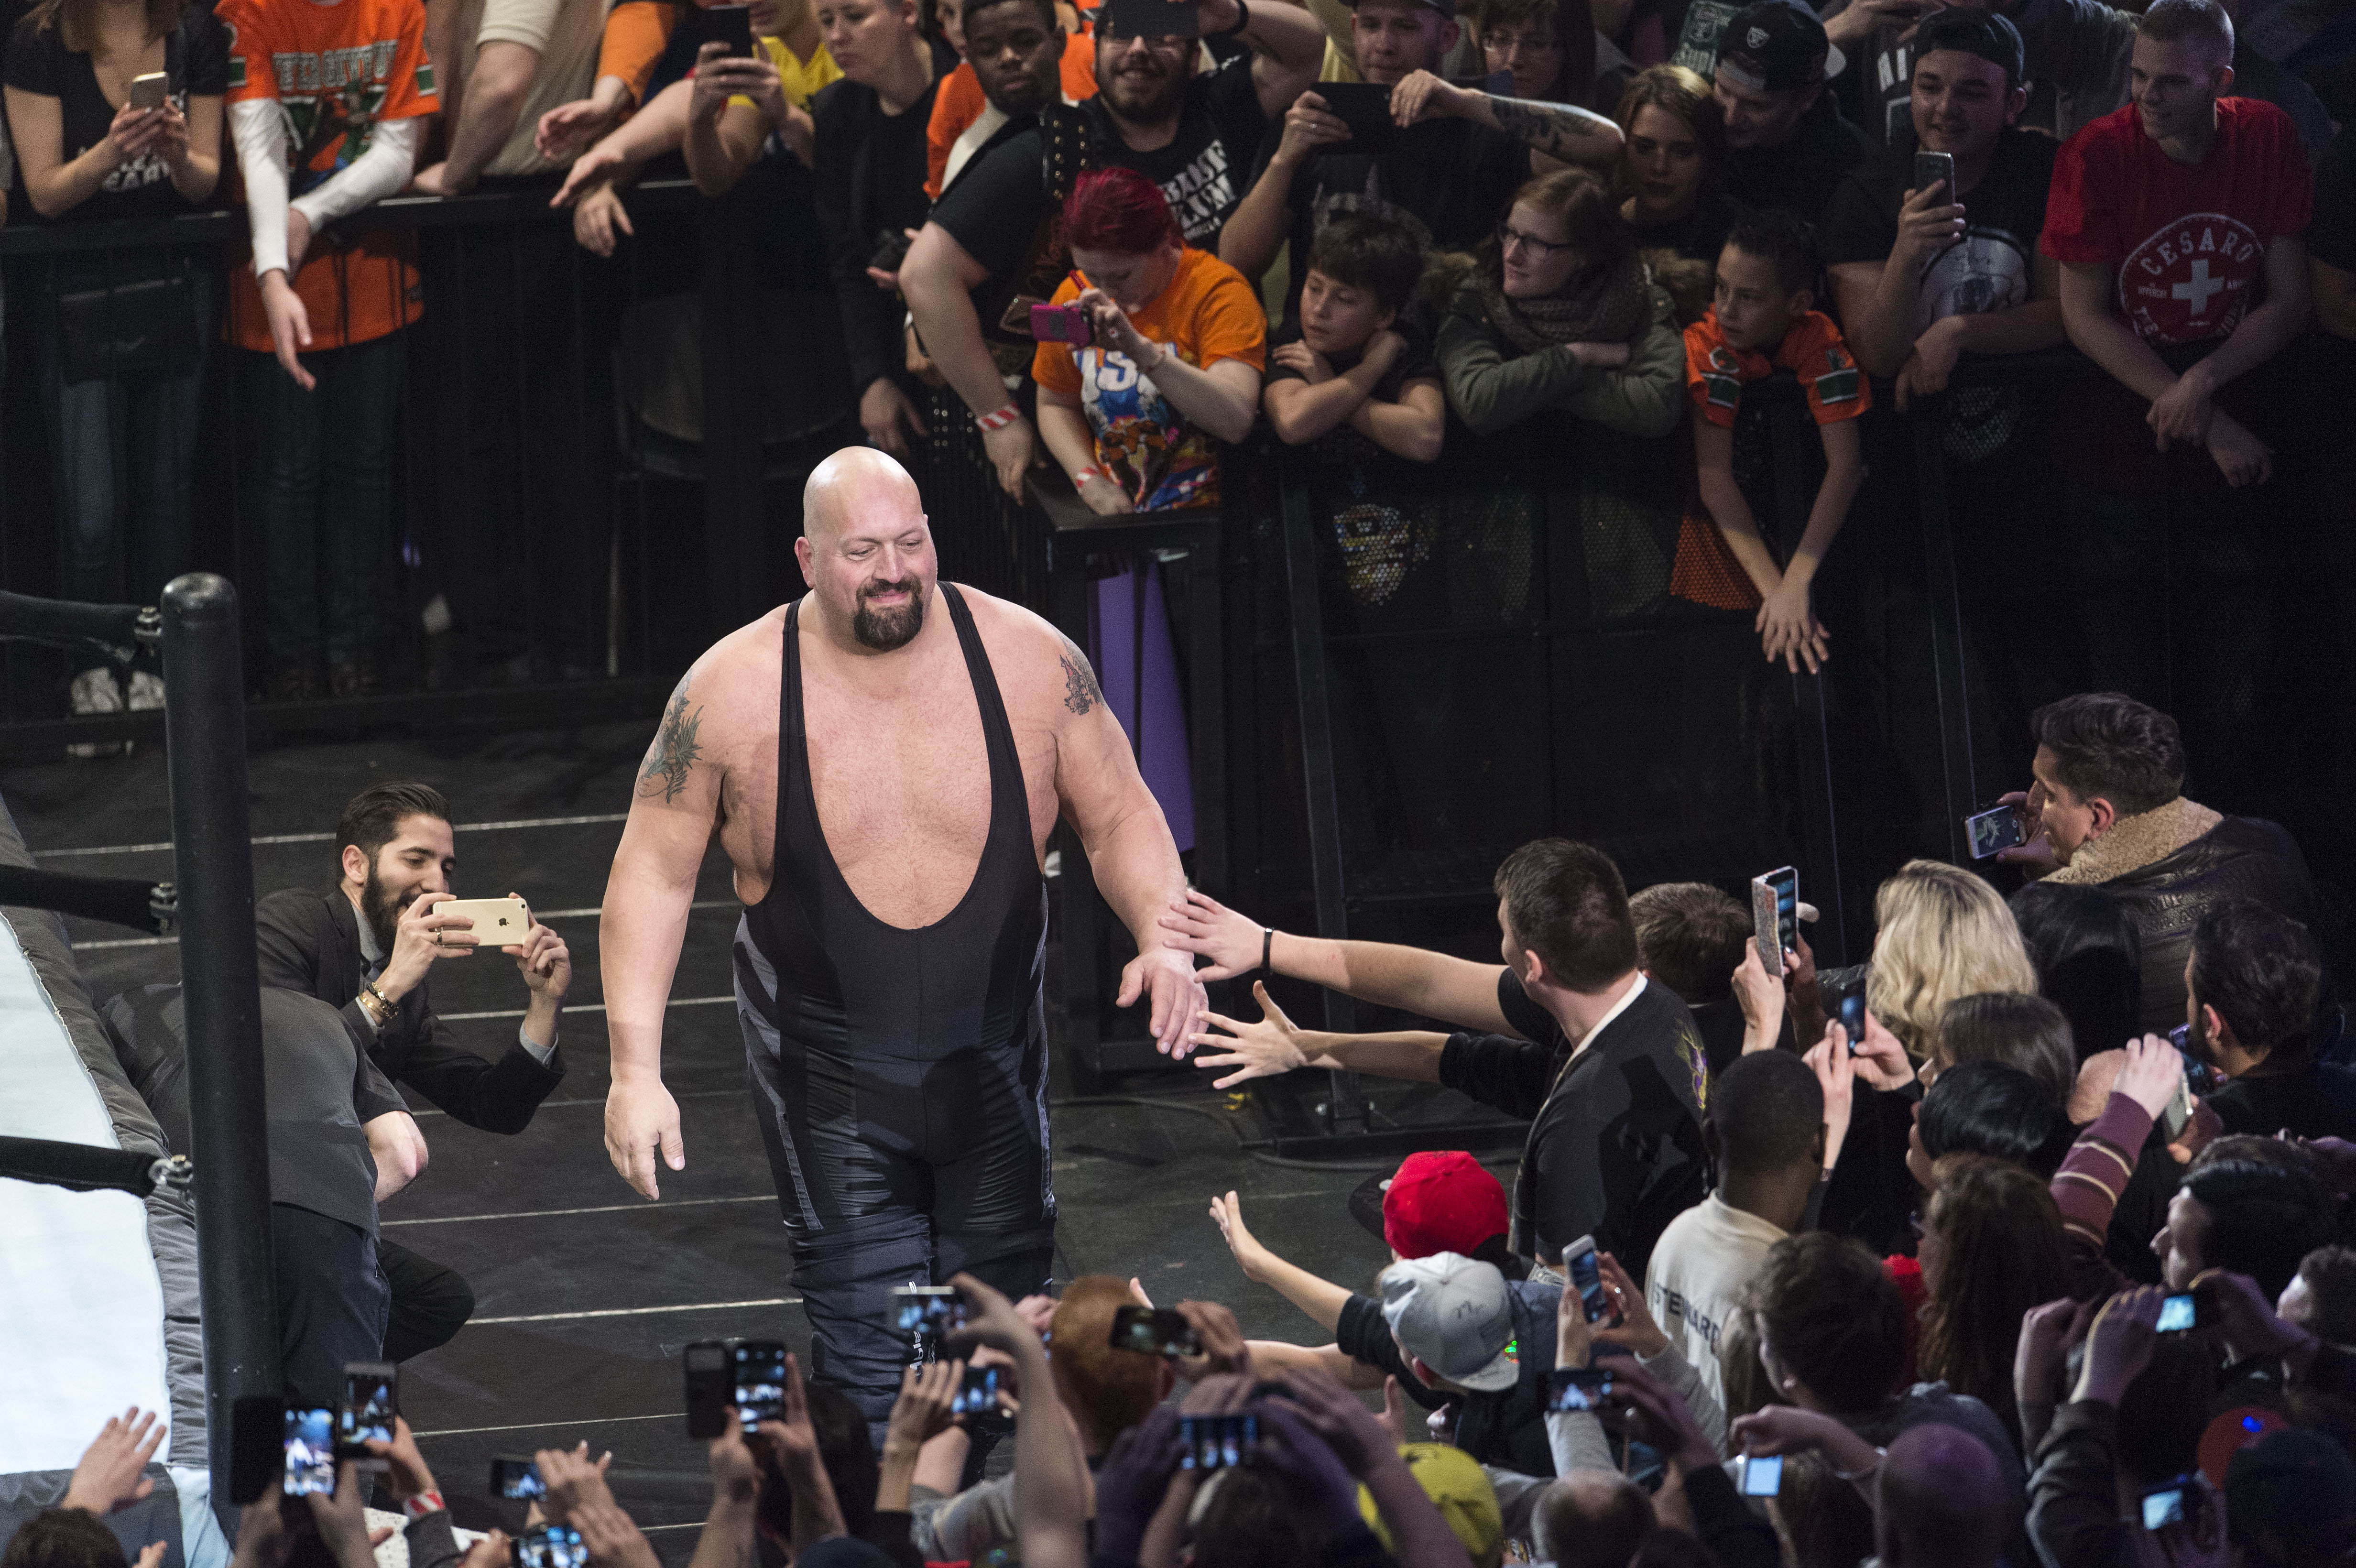 The Big Show Teases ‘Giant Return’, Jonathan Coachman Comments On His RAW Return Tonight (Video)